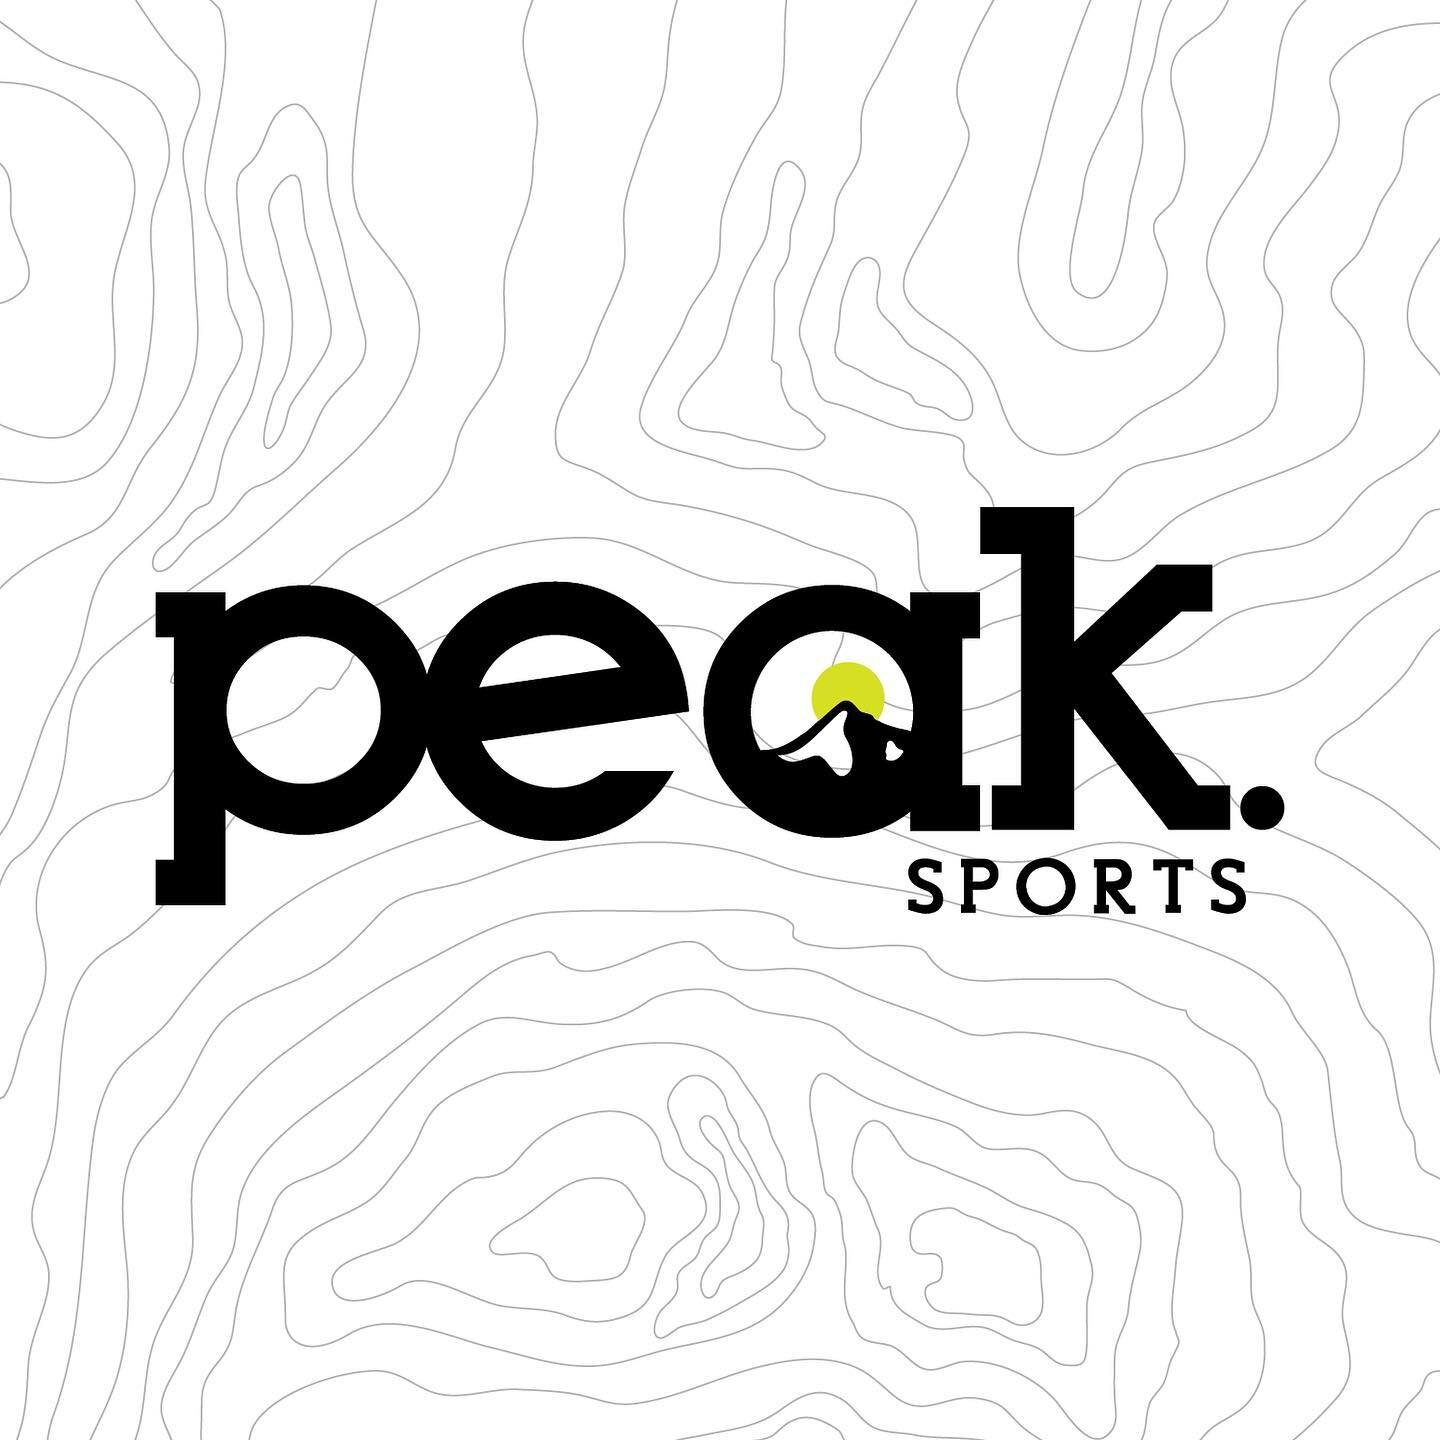 Peak Sports 🎿 - One of my all time favorite logos and brands that I had the pleasure of creating.
&bull;
Thanks Peak for the opportunity &amp; trust in the evolving brand.